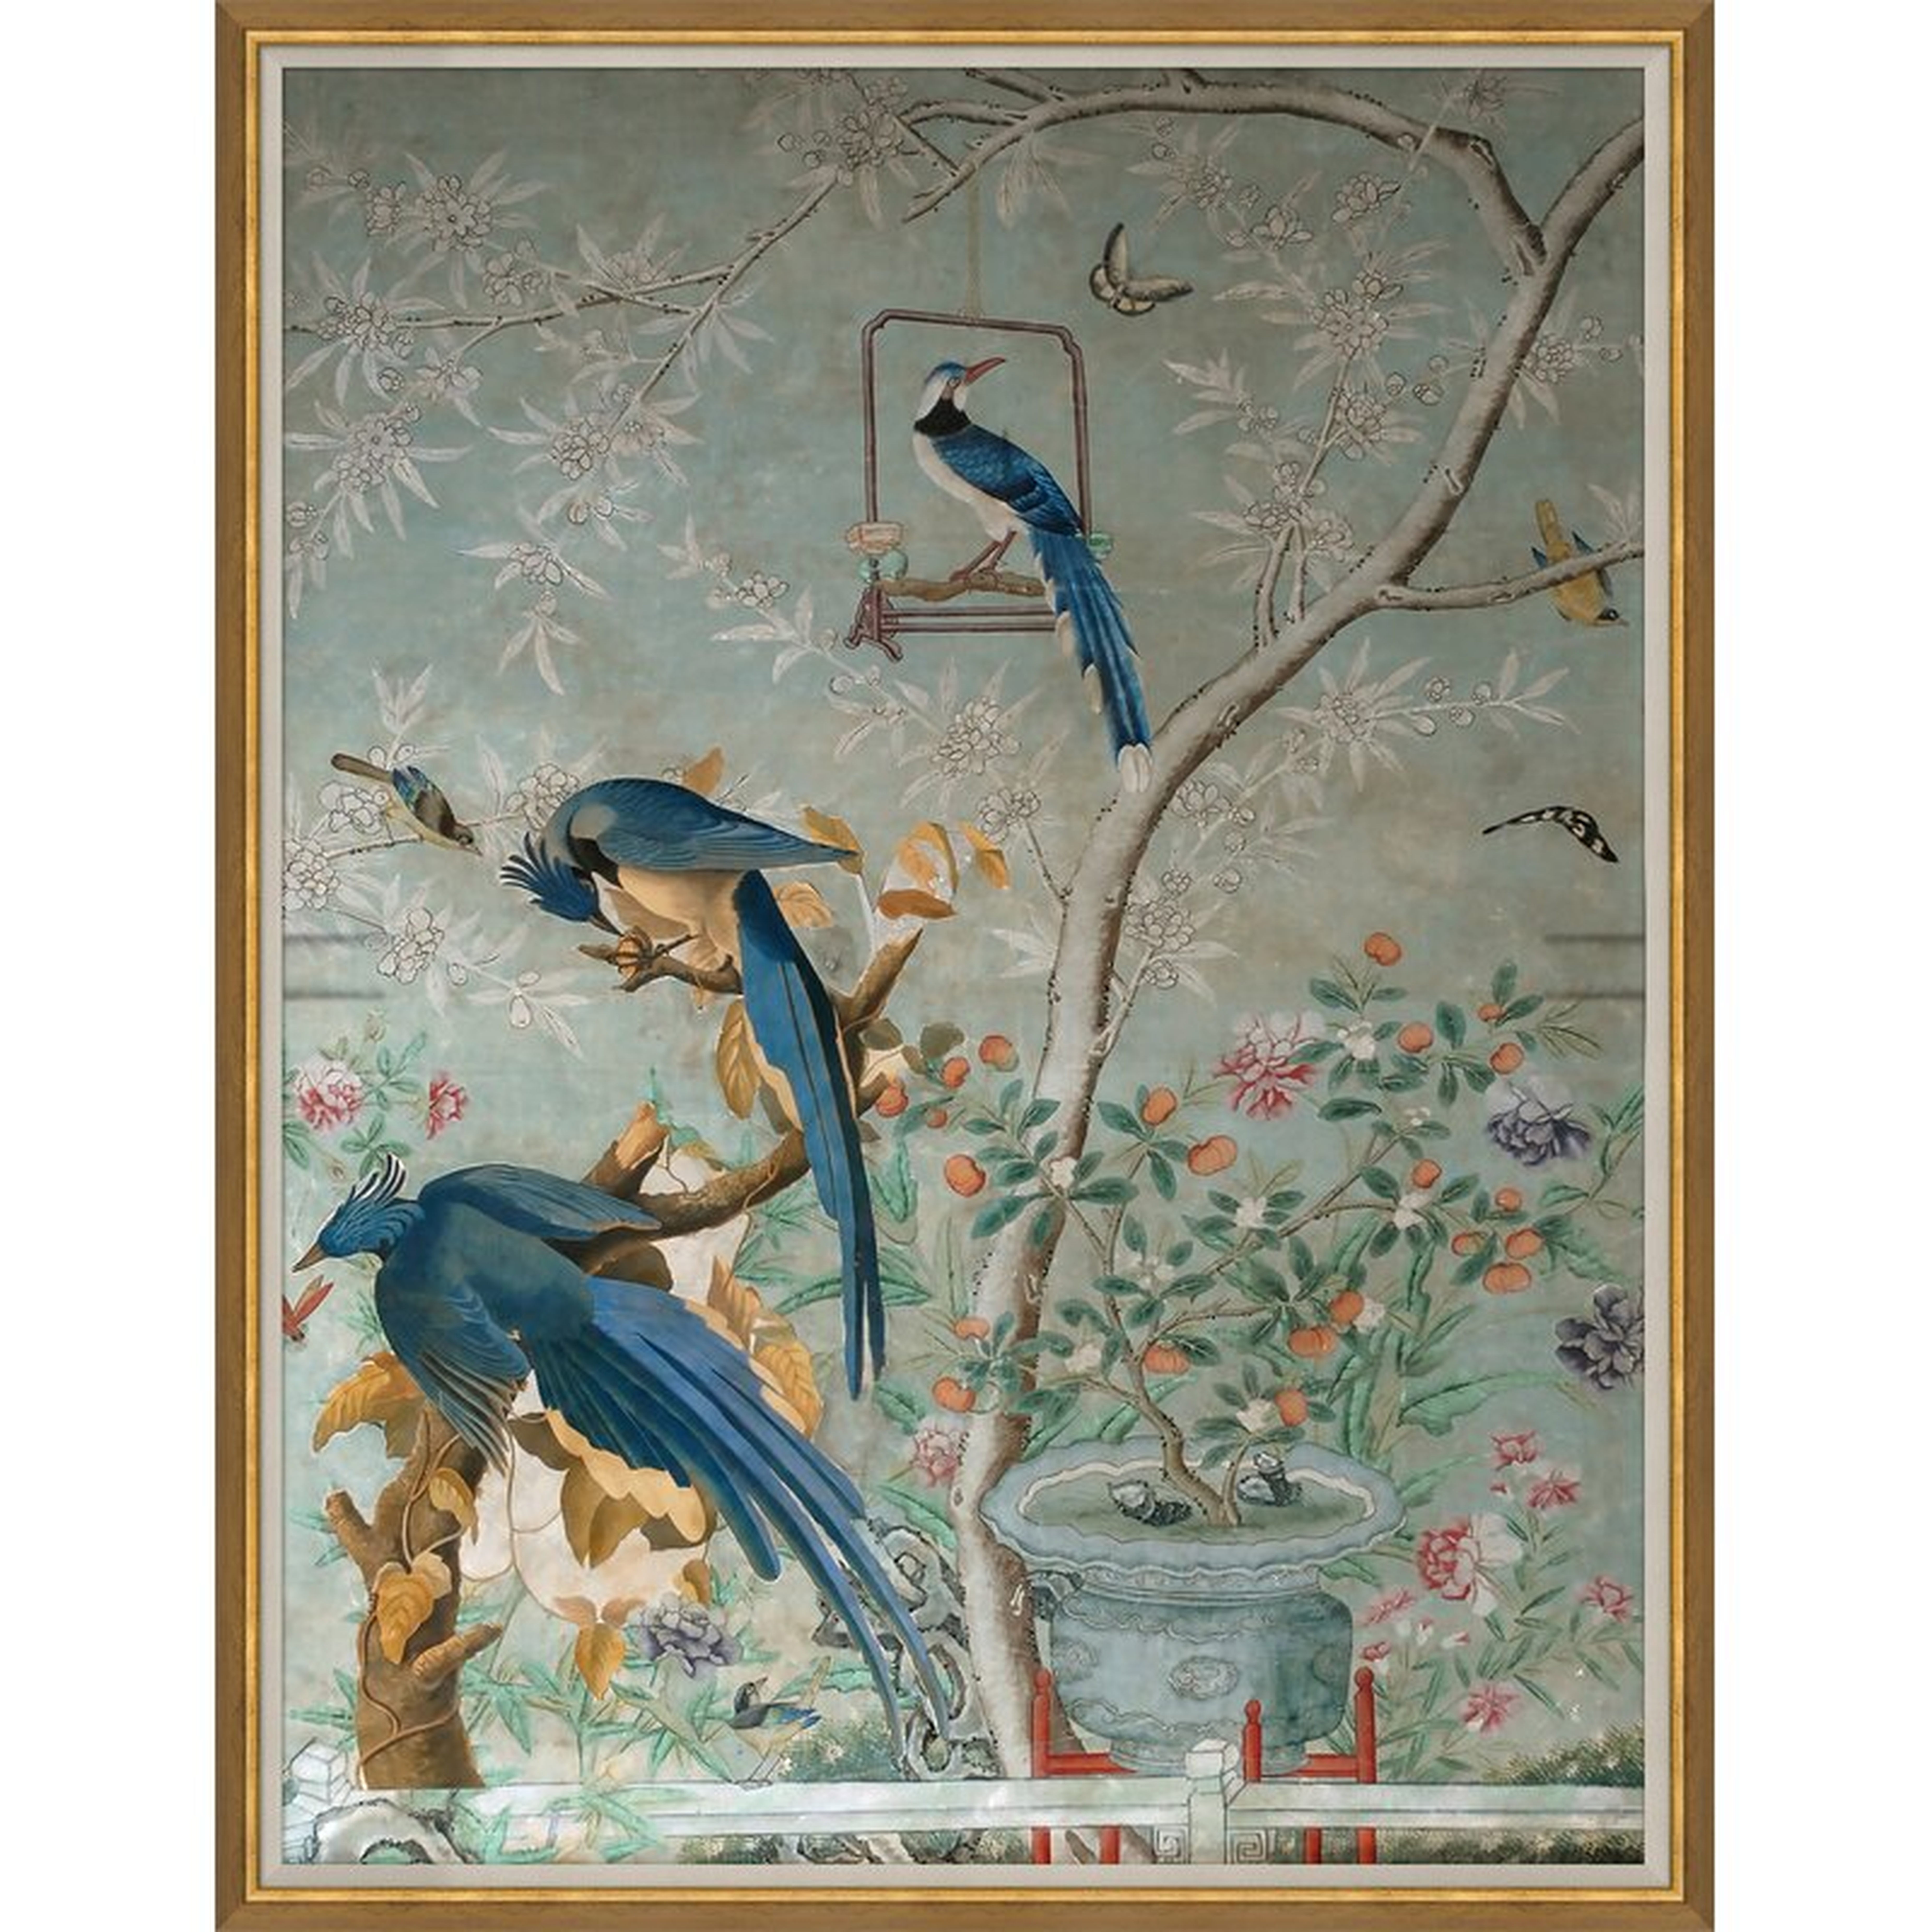 Soicher Marin 'Chinoiserie' - Picture Frame Print on Paper - Perigold